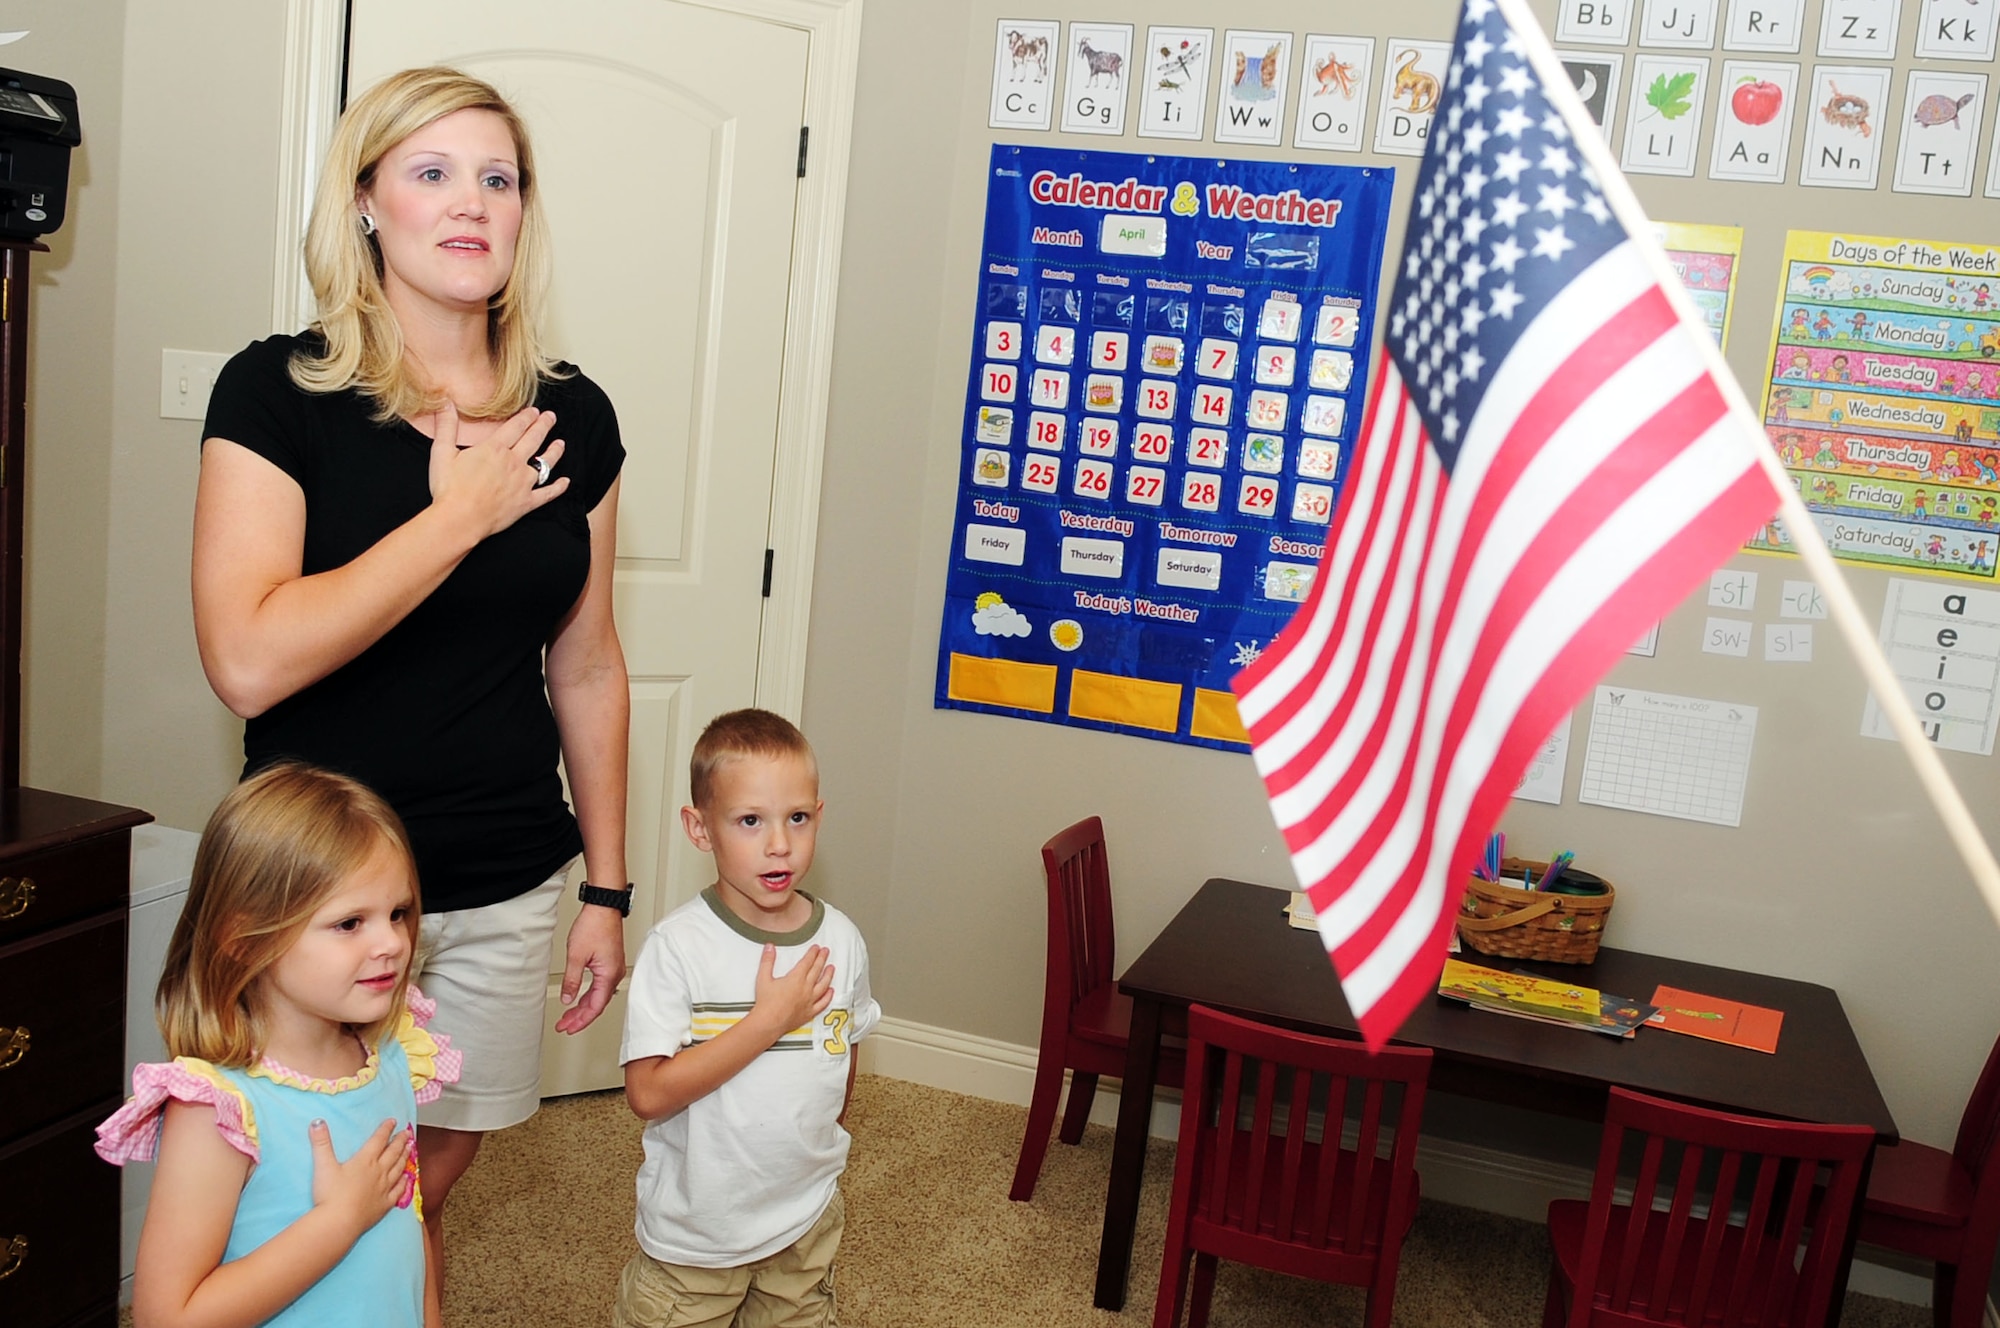 Mrs. Hilary Free says the Pledge of Allegience with her children, Ashlin, 4, and Will, 5, prior to beginning their school day at their home in Shreveport, La., April 29. Mrs. Free home schools all three of her children including her one year-old daughter, Presley. (U.S. Air Force photo/Senior Airman Joanna M. Kresge)